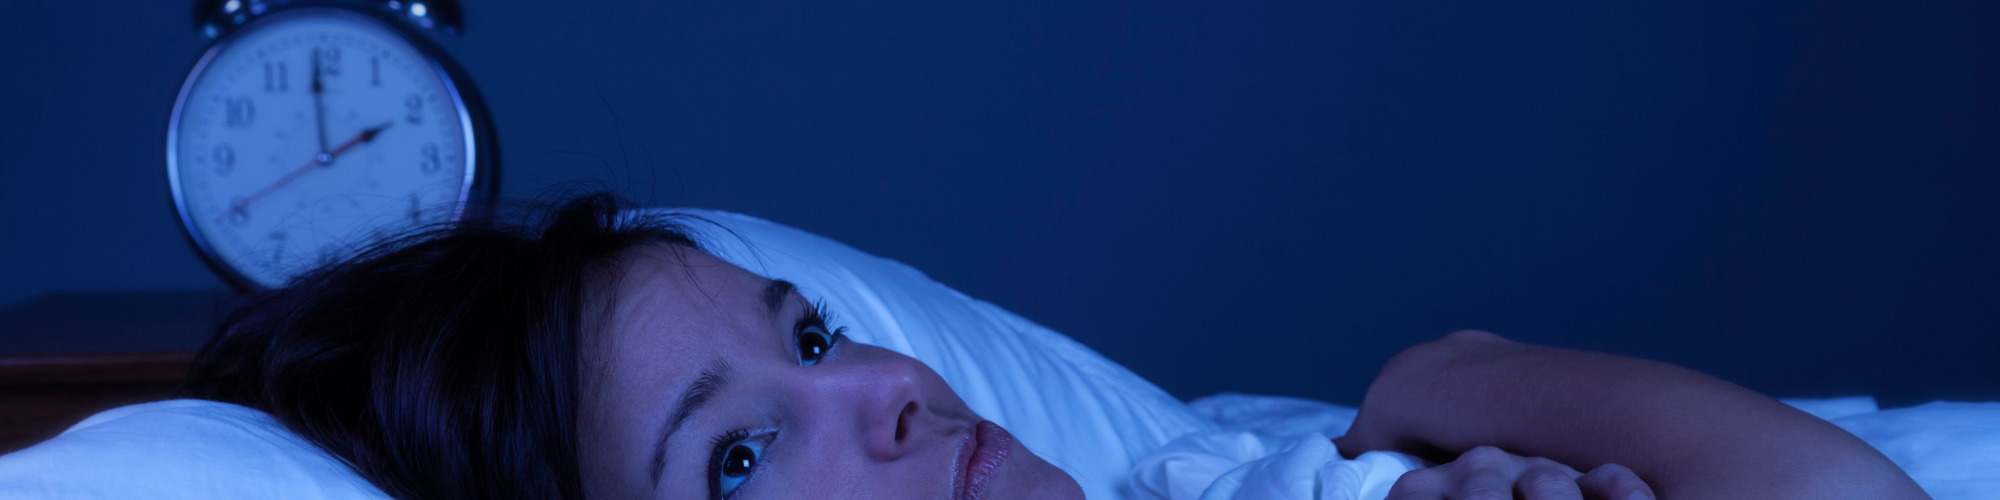 How to Overcome Insomnia & Other Sleep Problems - A Guide for Professionals